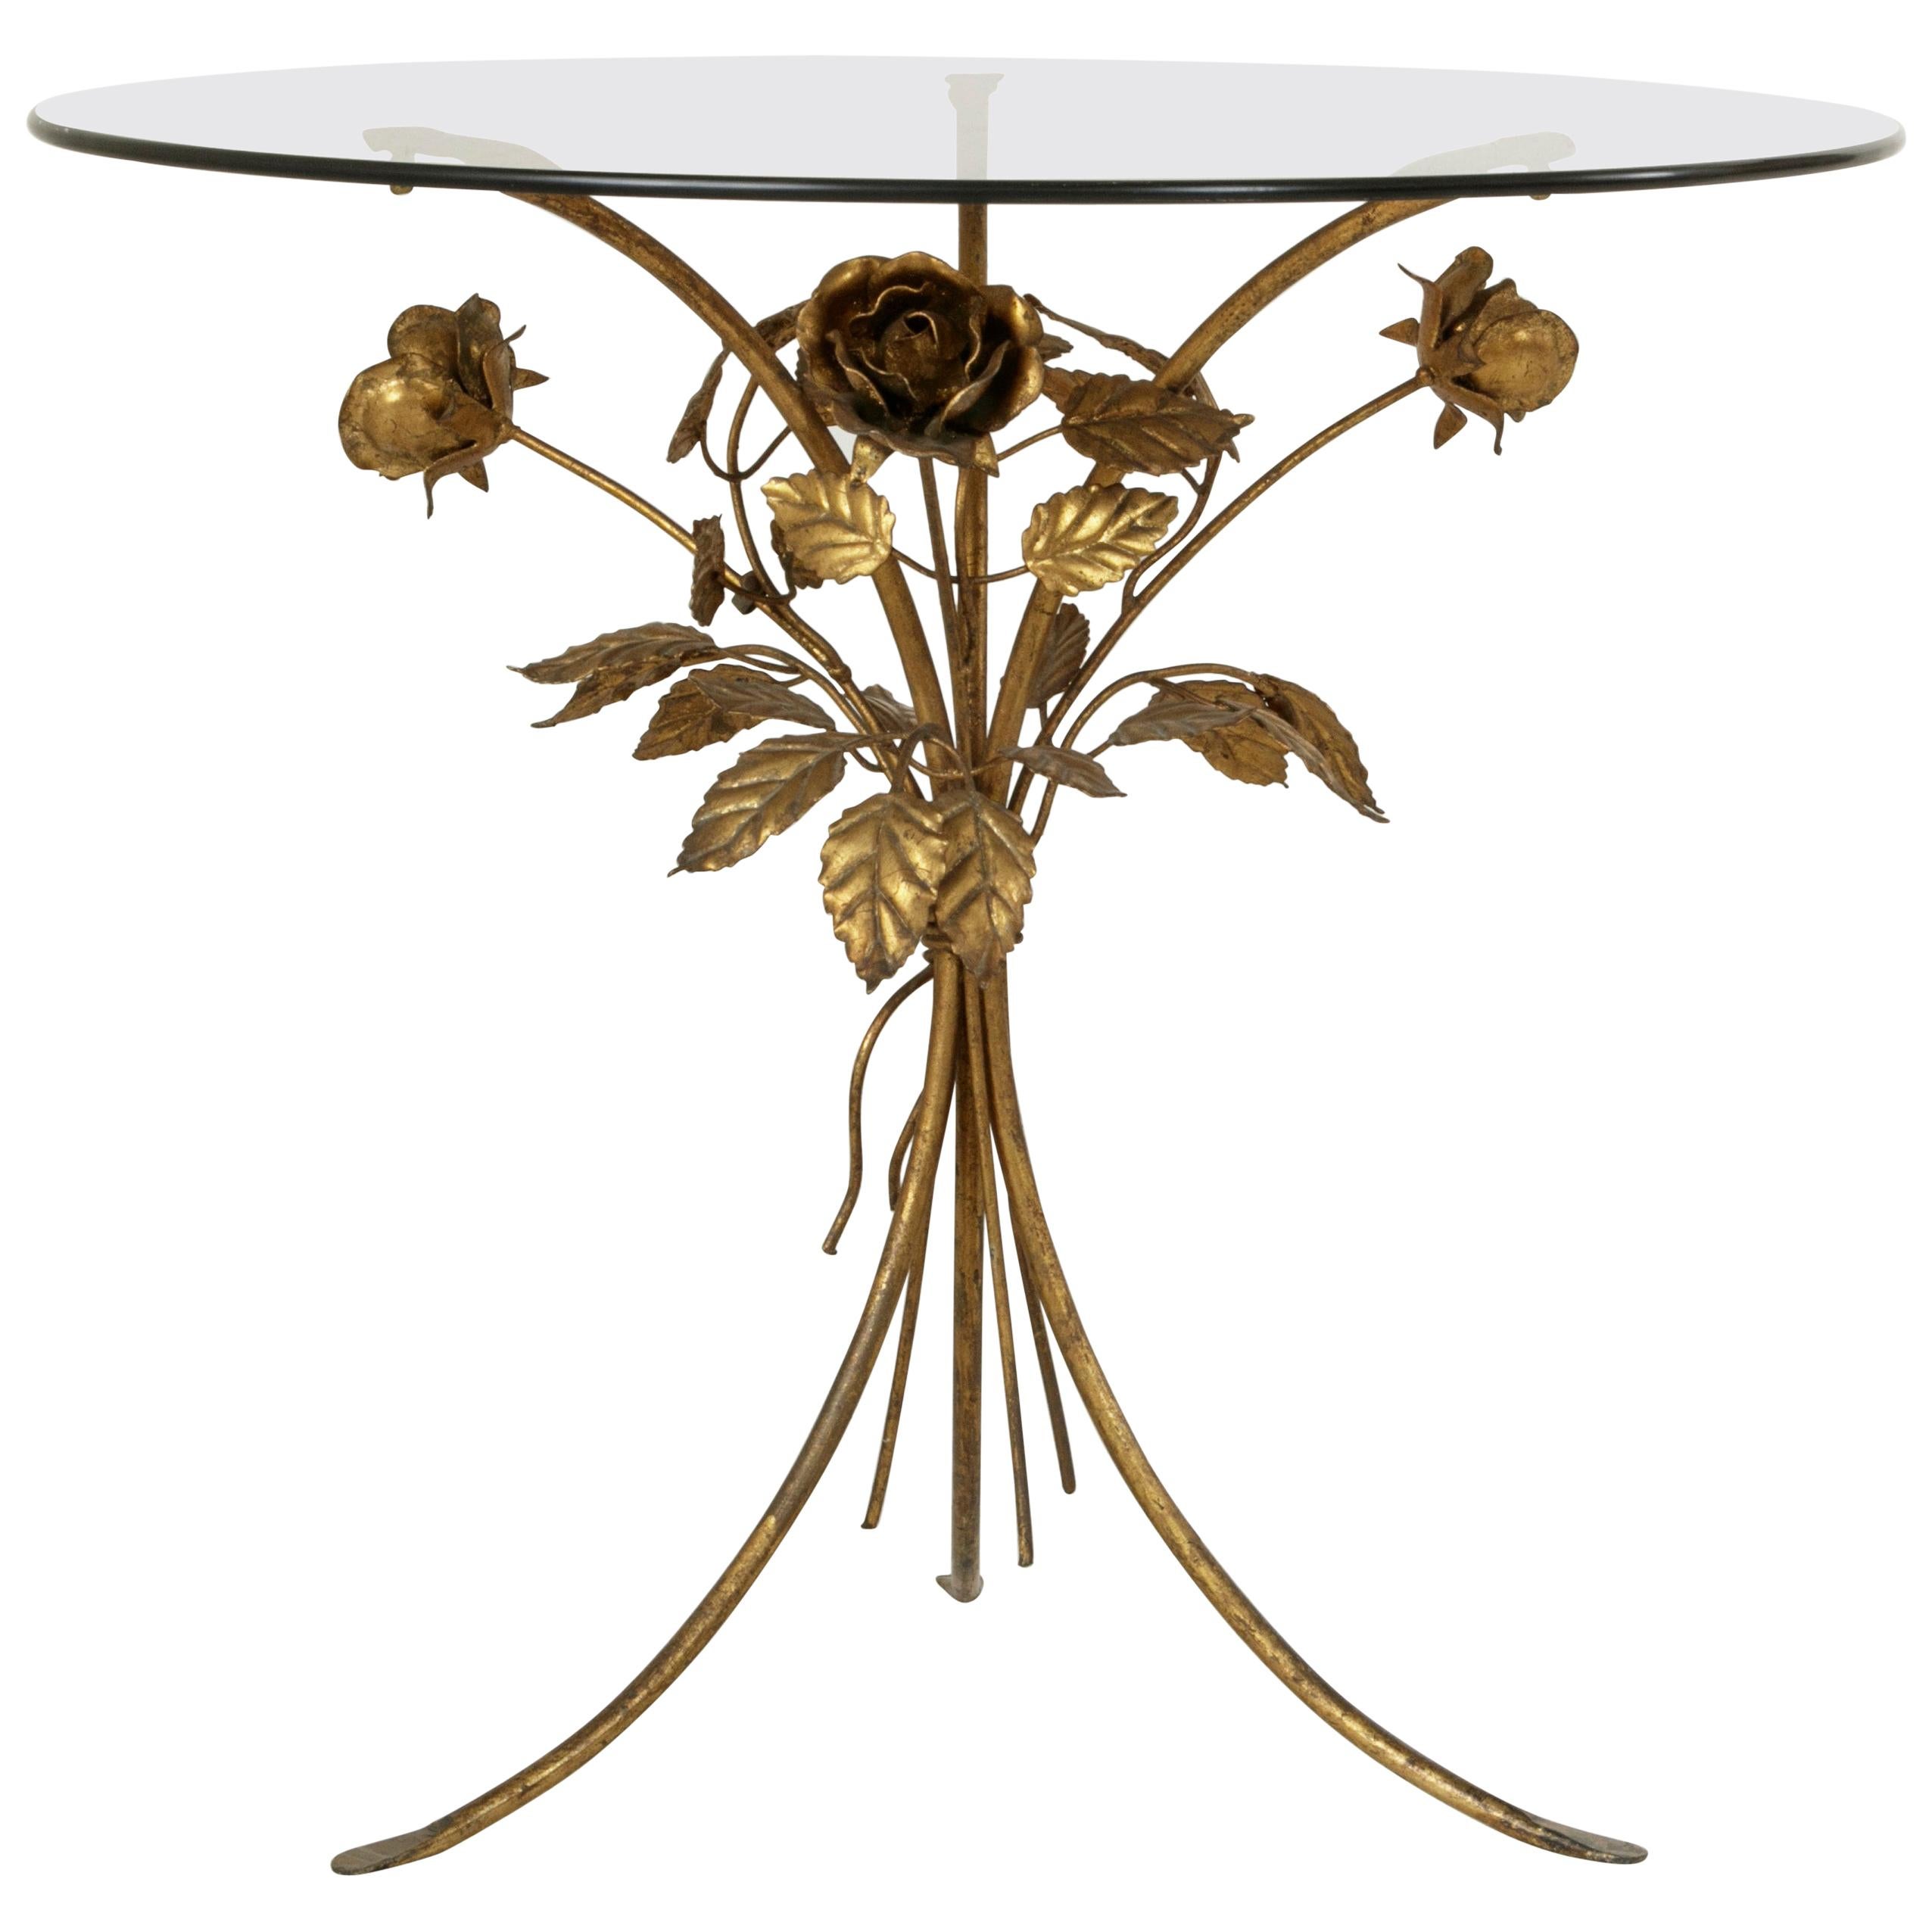 Midcentury Italian Gilt Metal Side Table with Roses and Smoked Glass Top